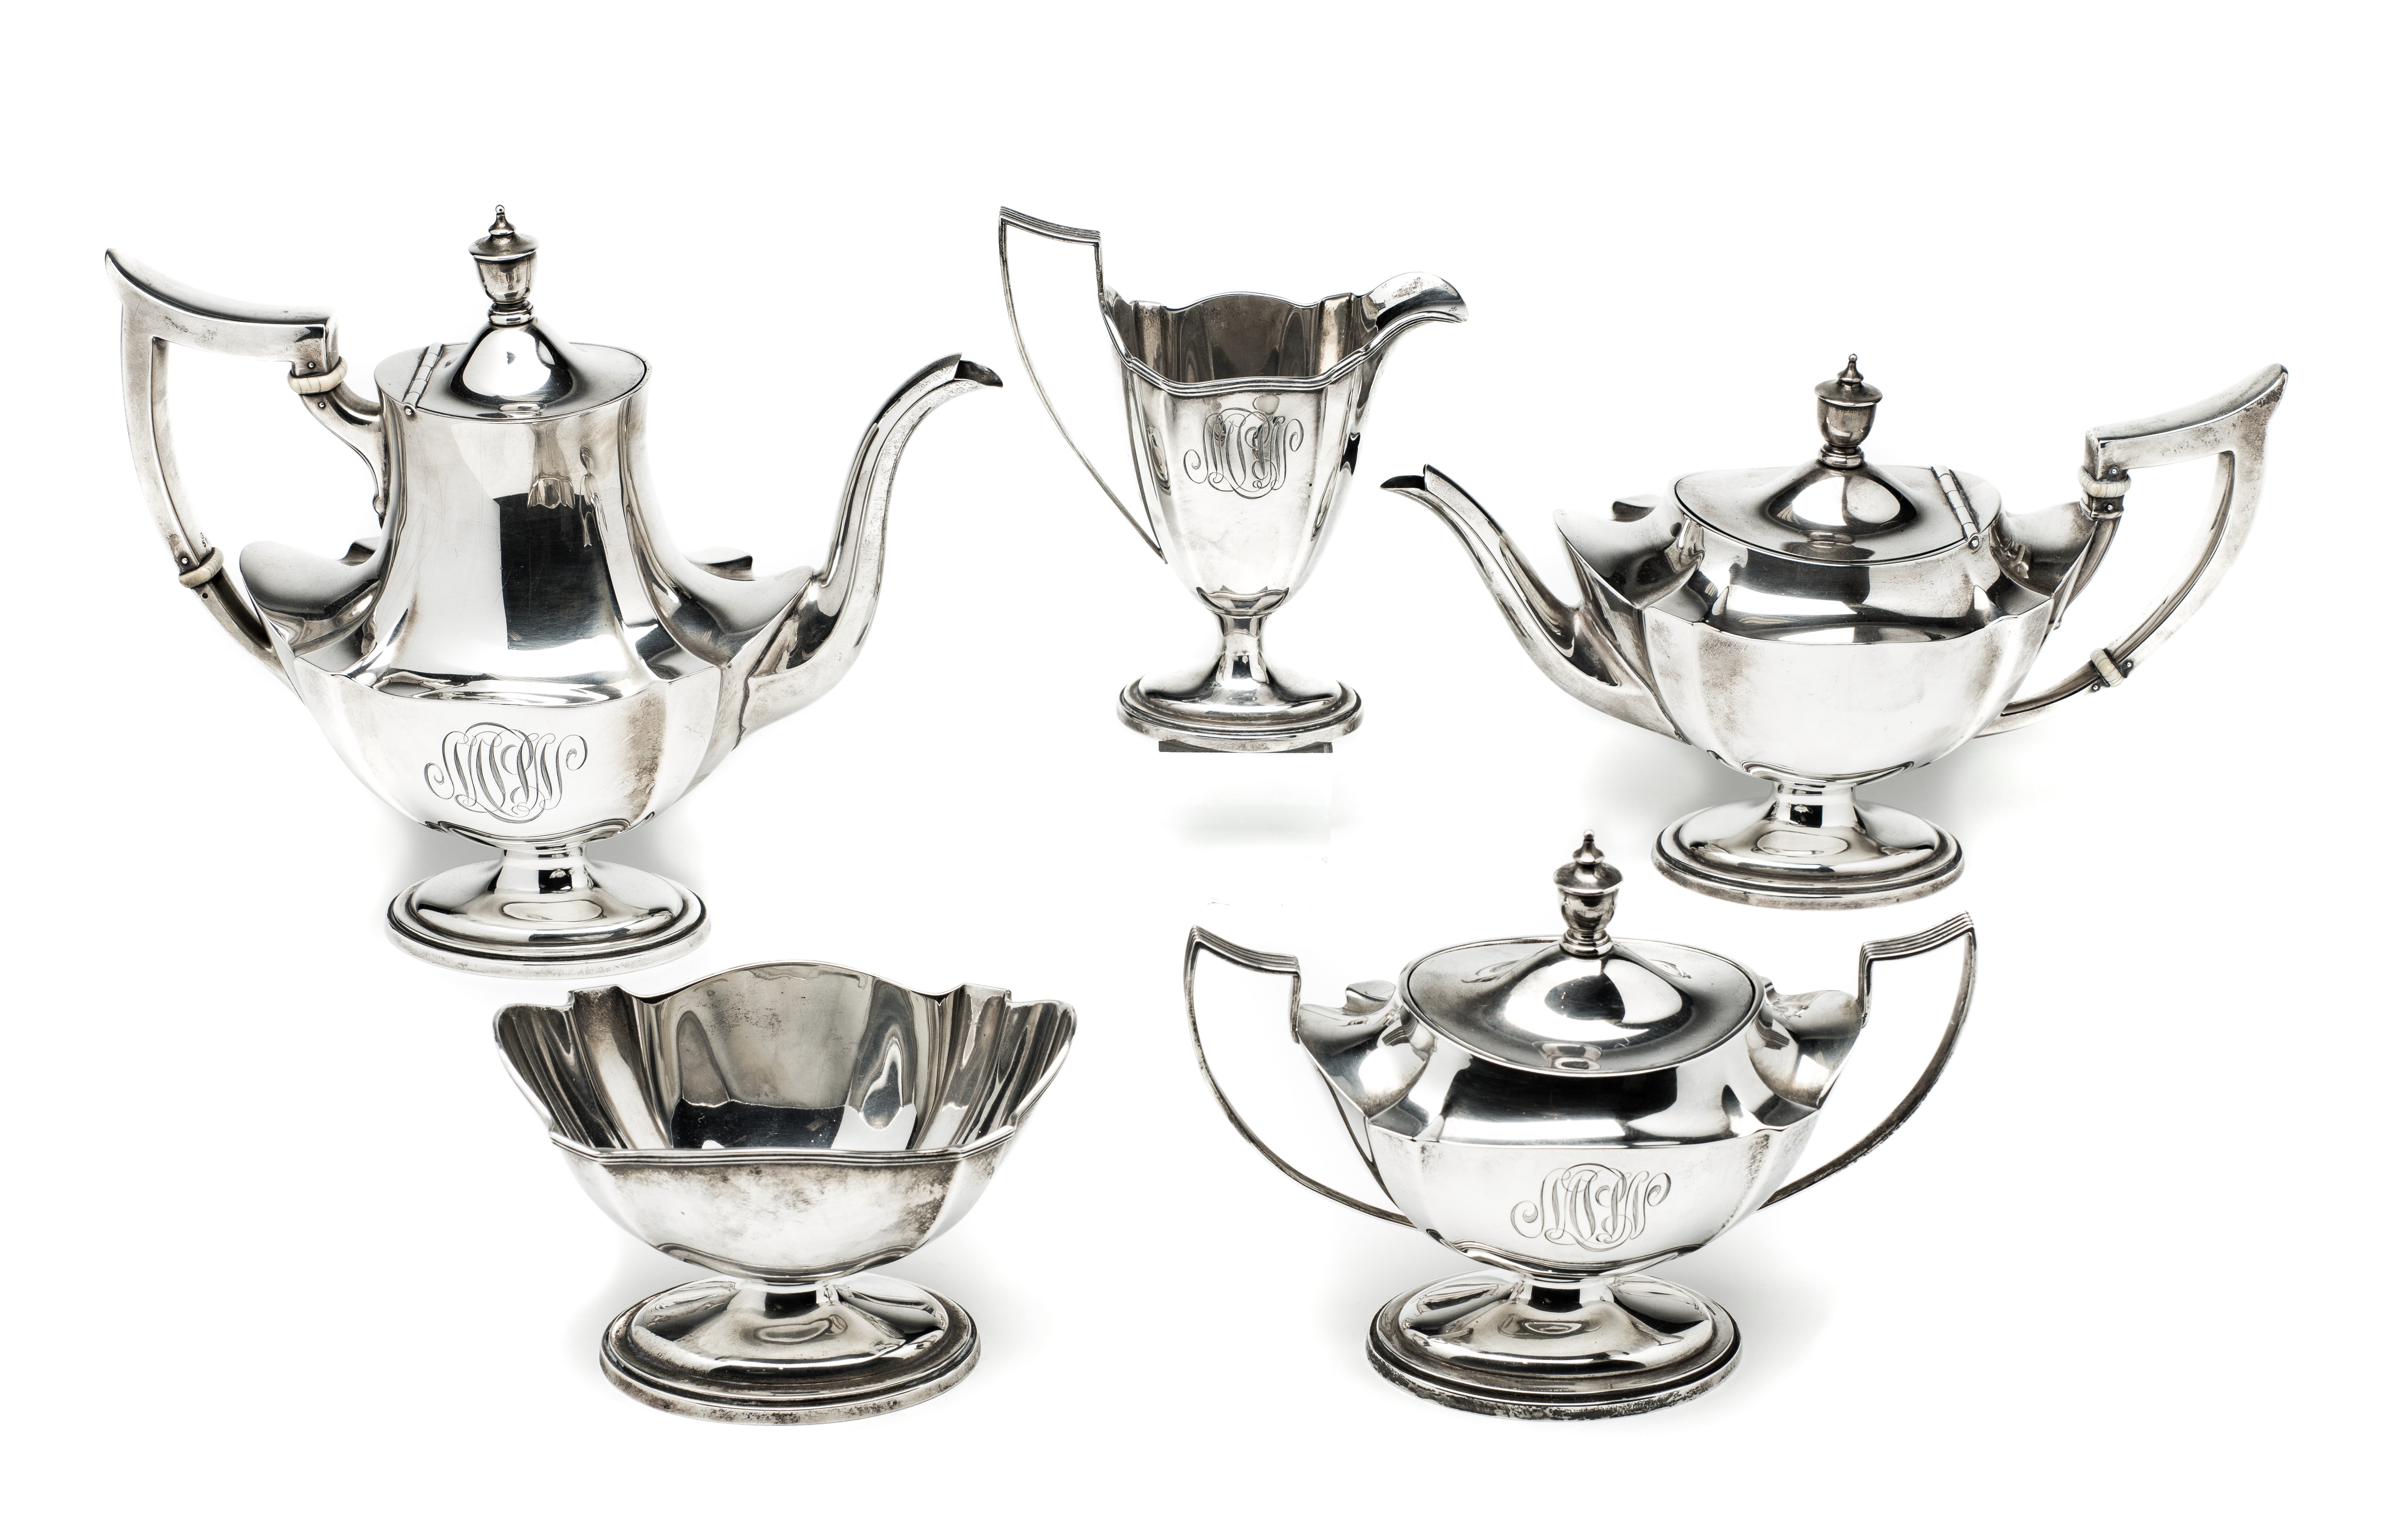 ˜AN AMERICAN SILVER FIVE-PIECE TEA AND COFFEE SET, GORHAM MANUFACTURING CO., PROVIDENCE RI, 1915